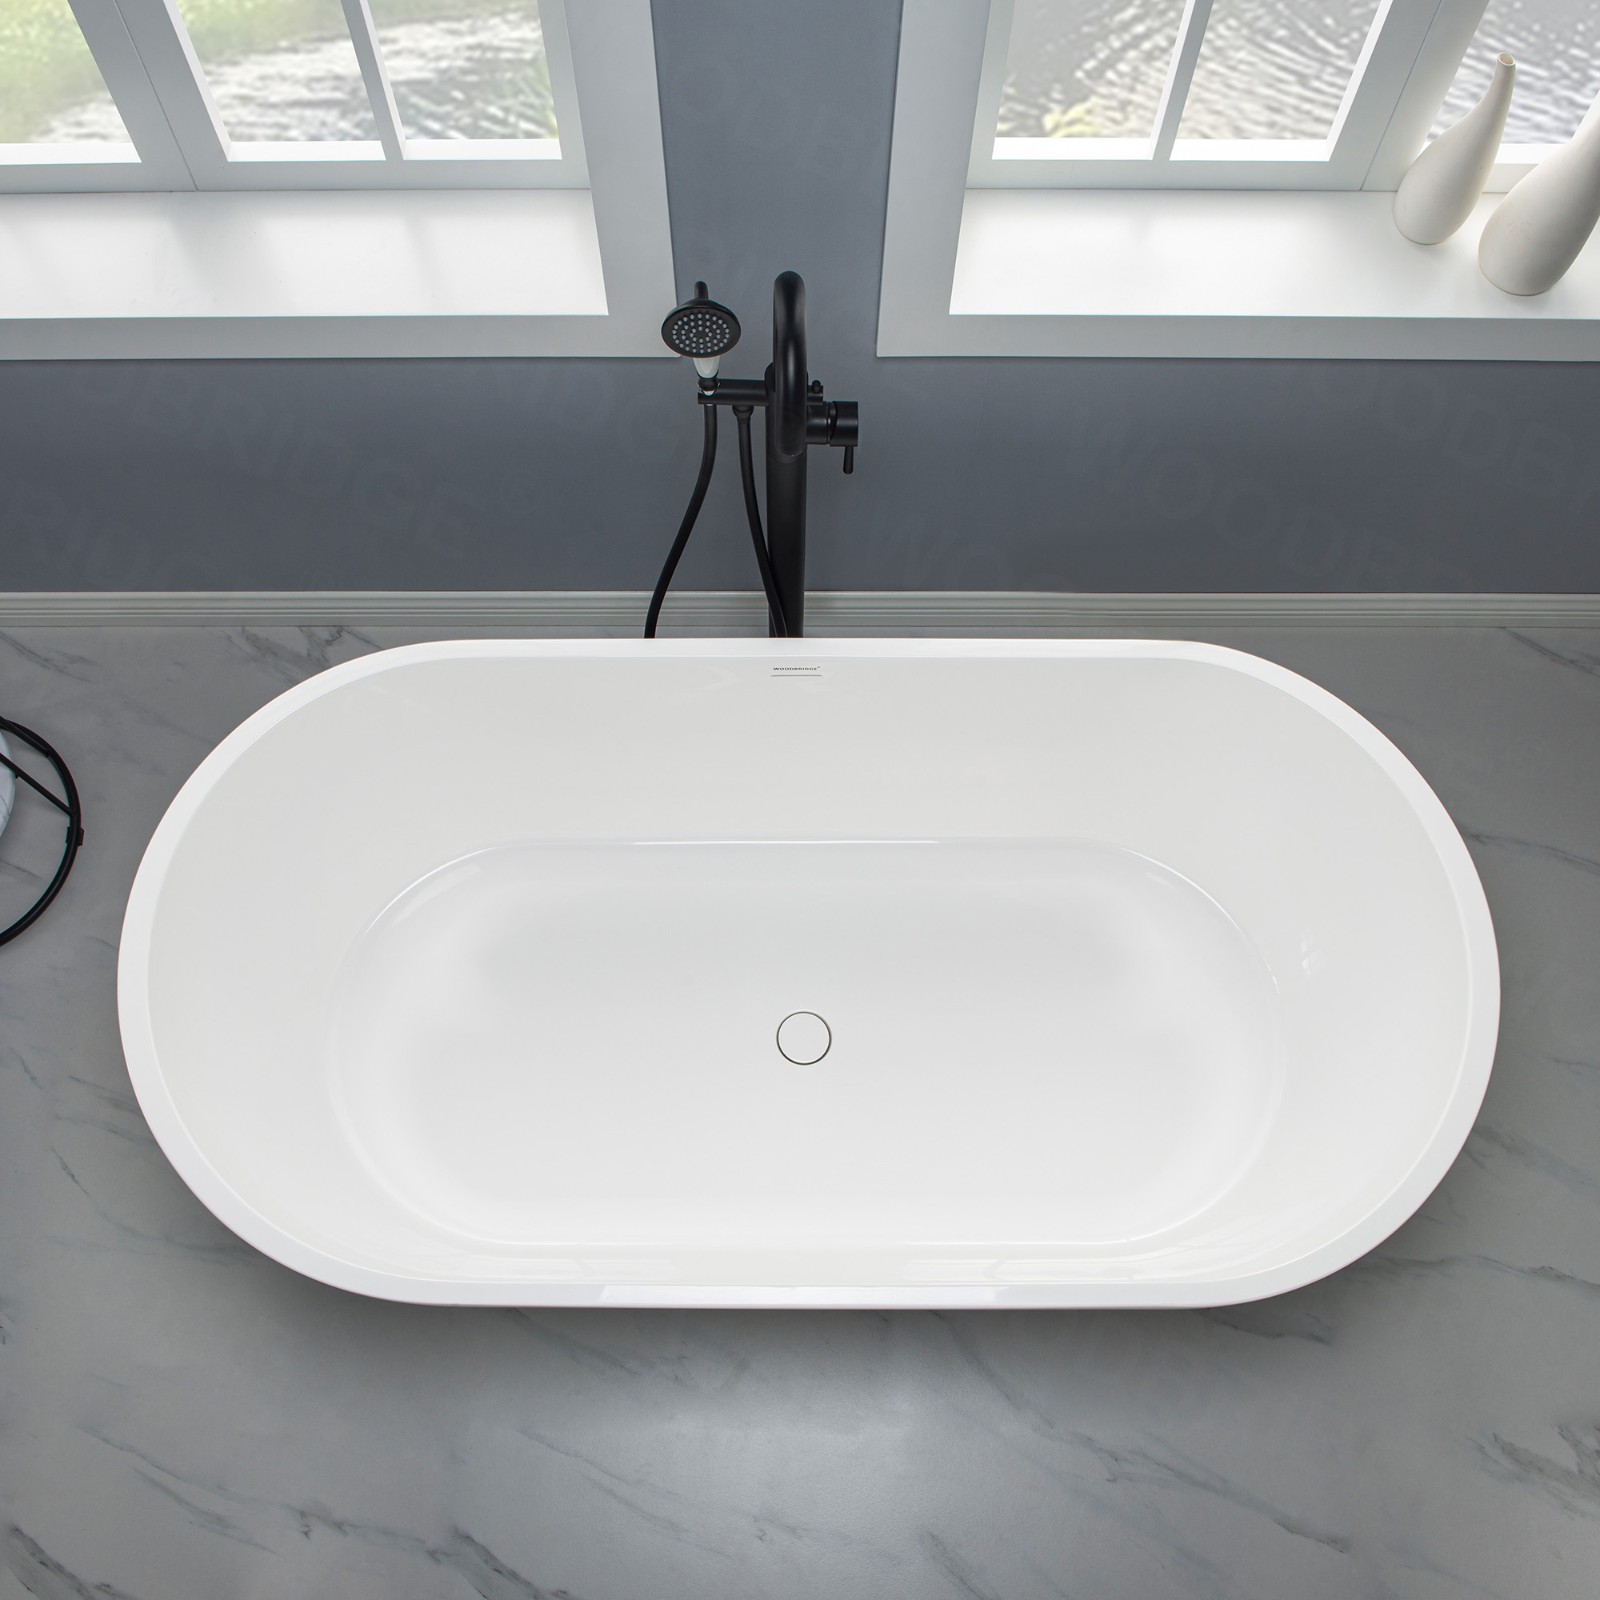  WOODBRIDGE 63 in. Freestanding Double Ended Solid Surface Soaking Bathtub with Center Drain Assembly and Overflow, B--51/BTA0051, Glossy White_8410